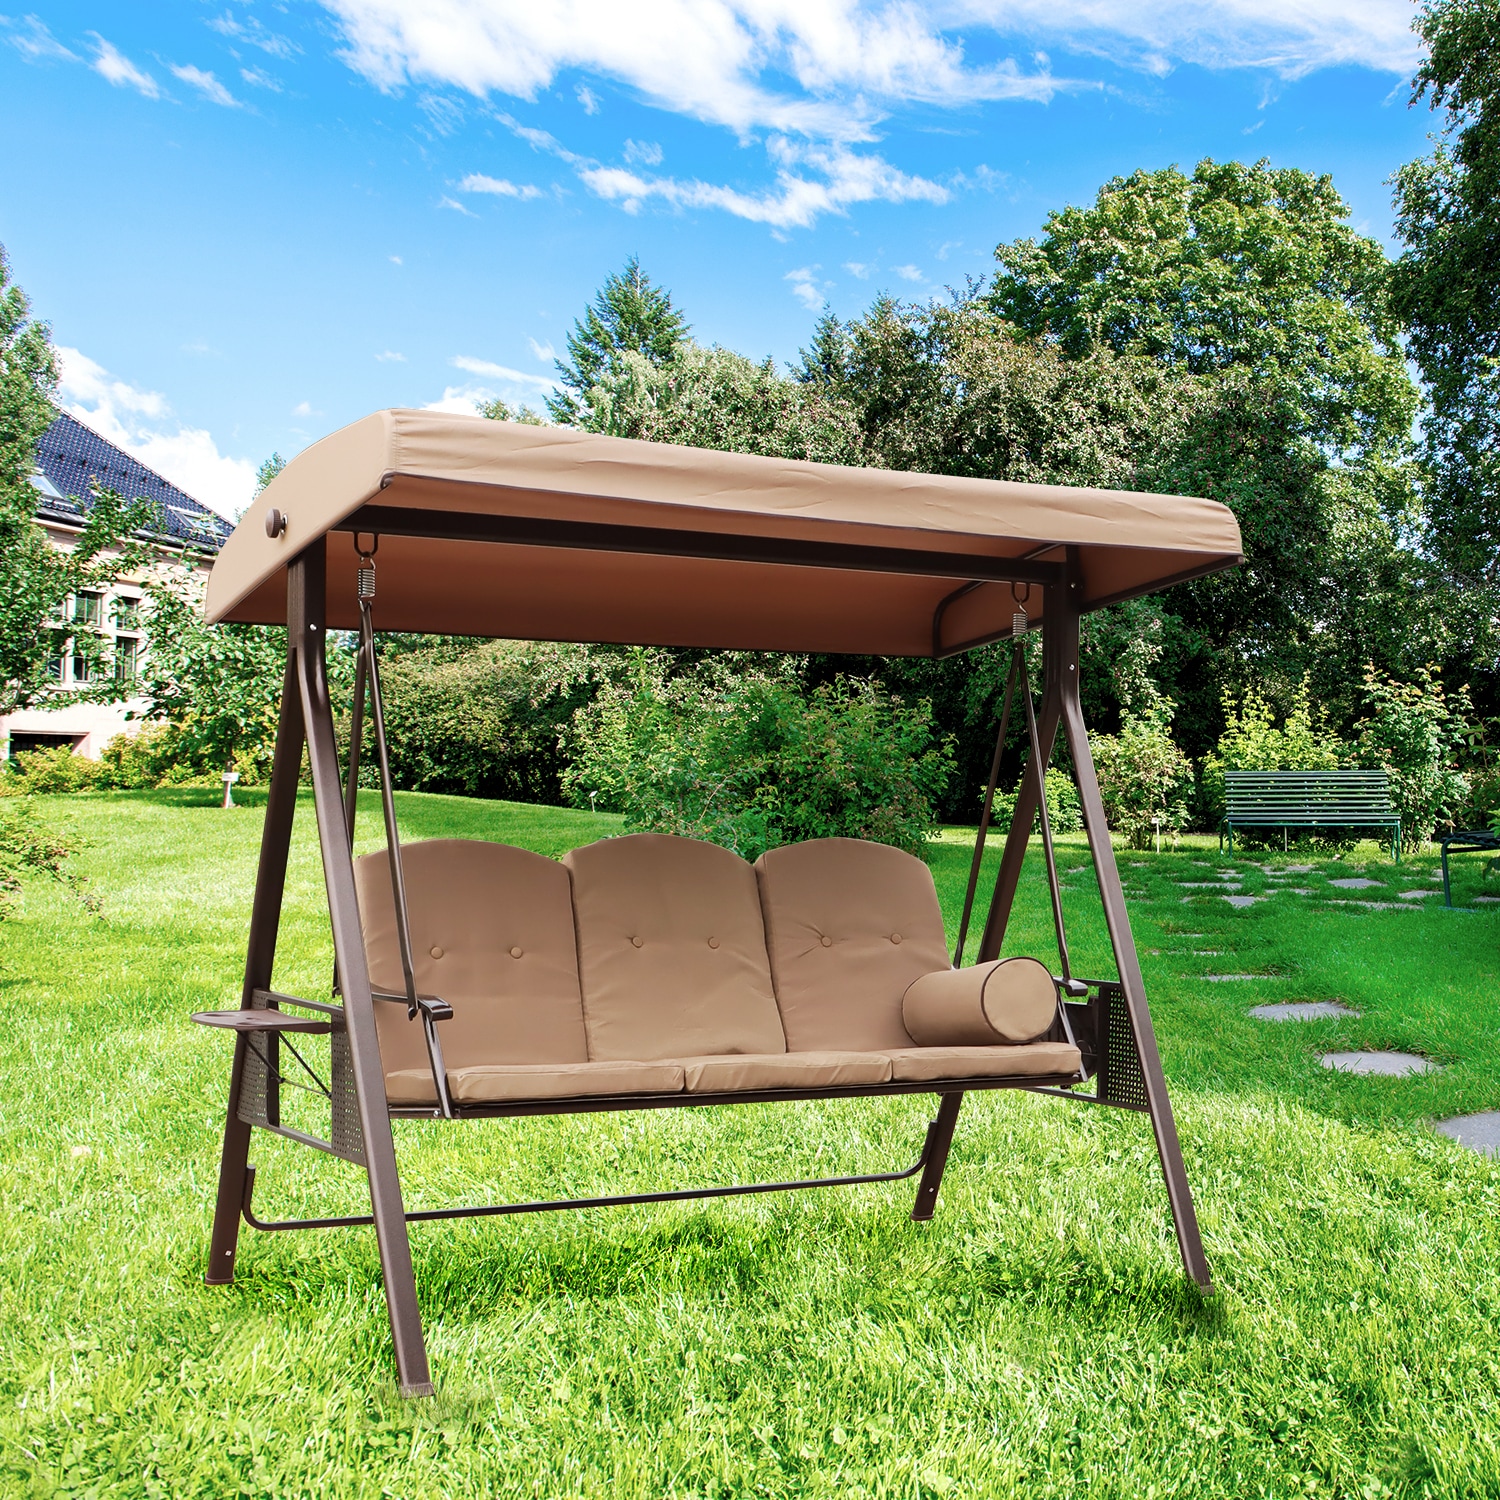 Mainstays* Classic Outdoor 3-Person Sling Canopy Porch Swing